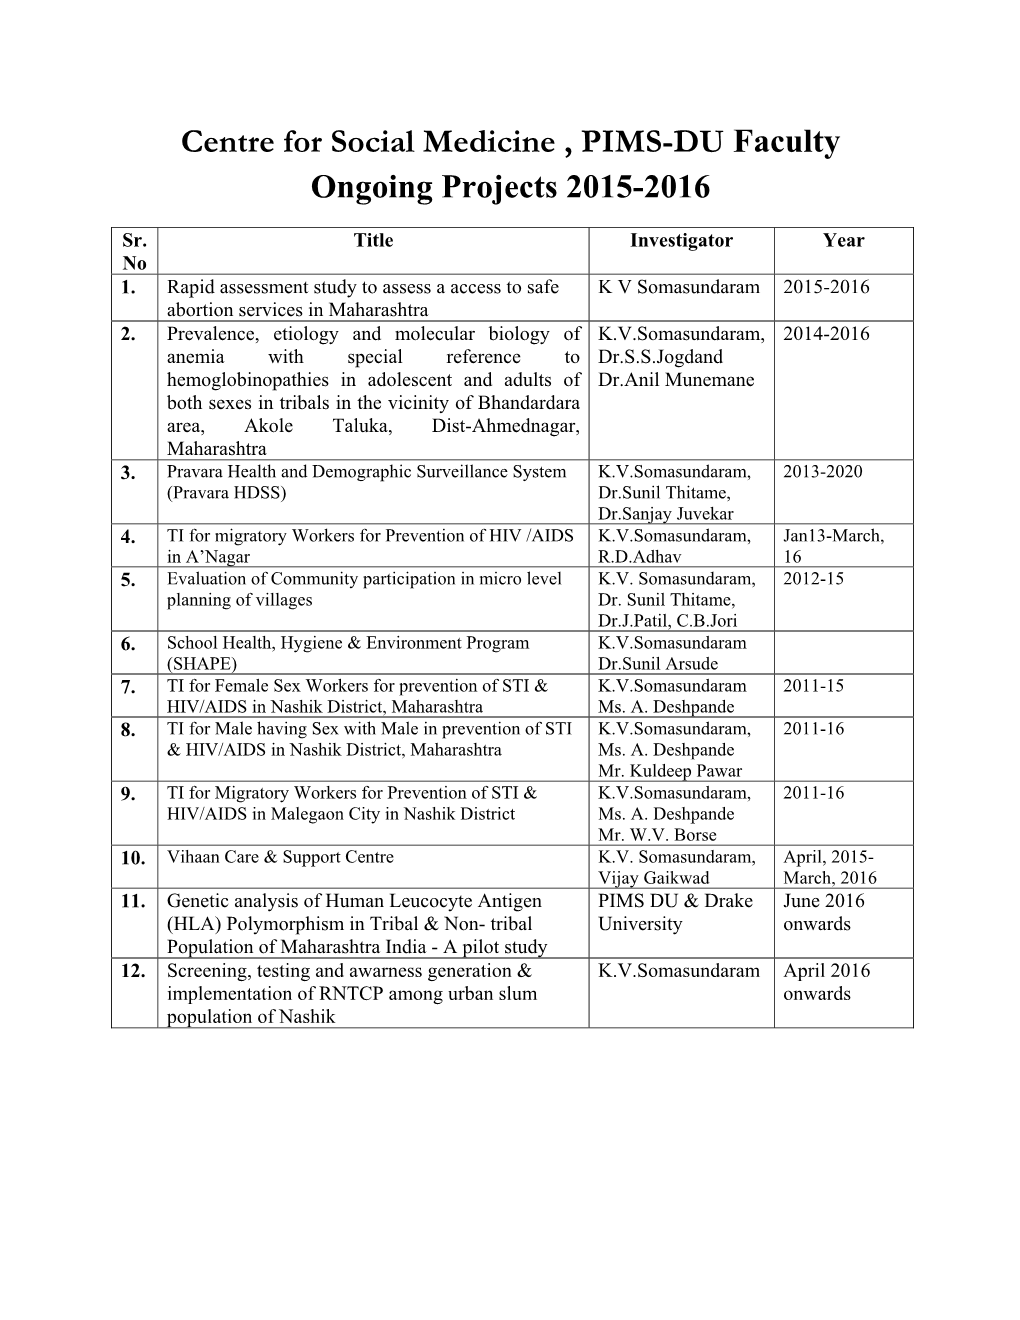 Centre for Social Medicine , PIMS-DU Faculty Ongoing Projects 2015-2016